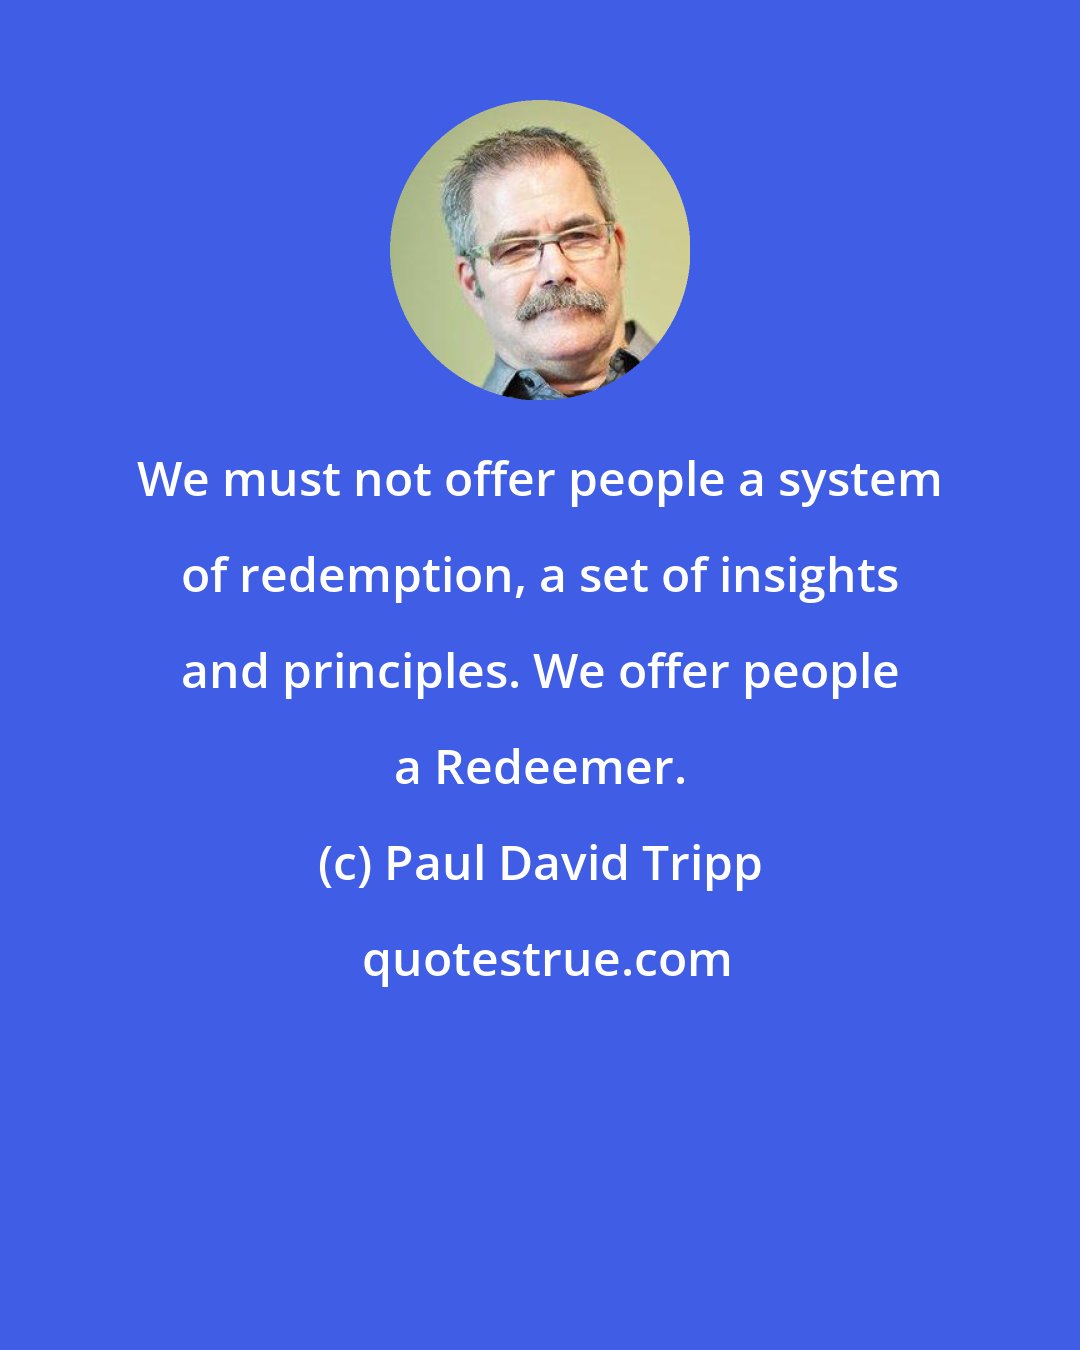 Paul David Tripp: We must not offer people a system of redemption, a set of insights and principles. We offer people a Redeemer.